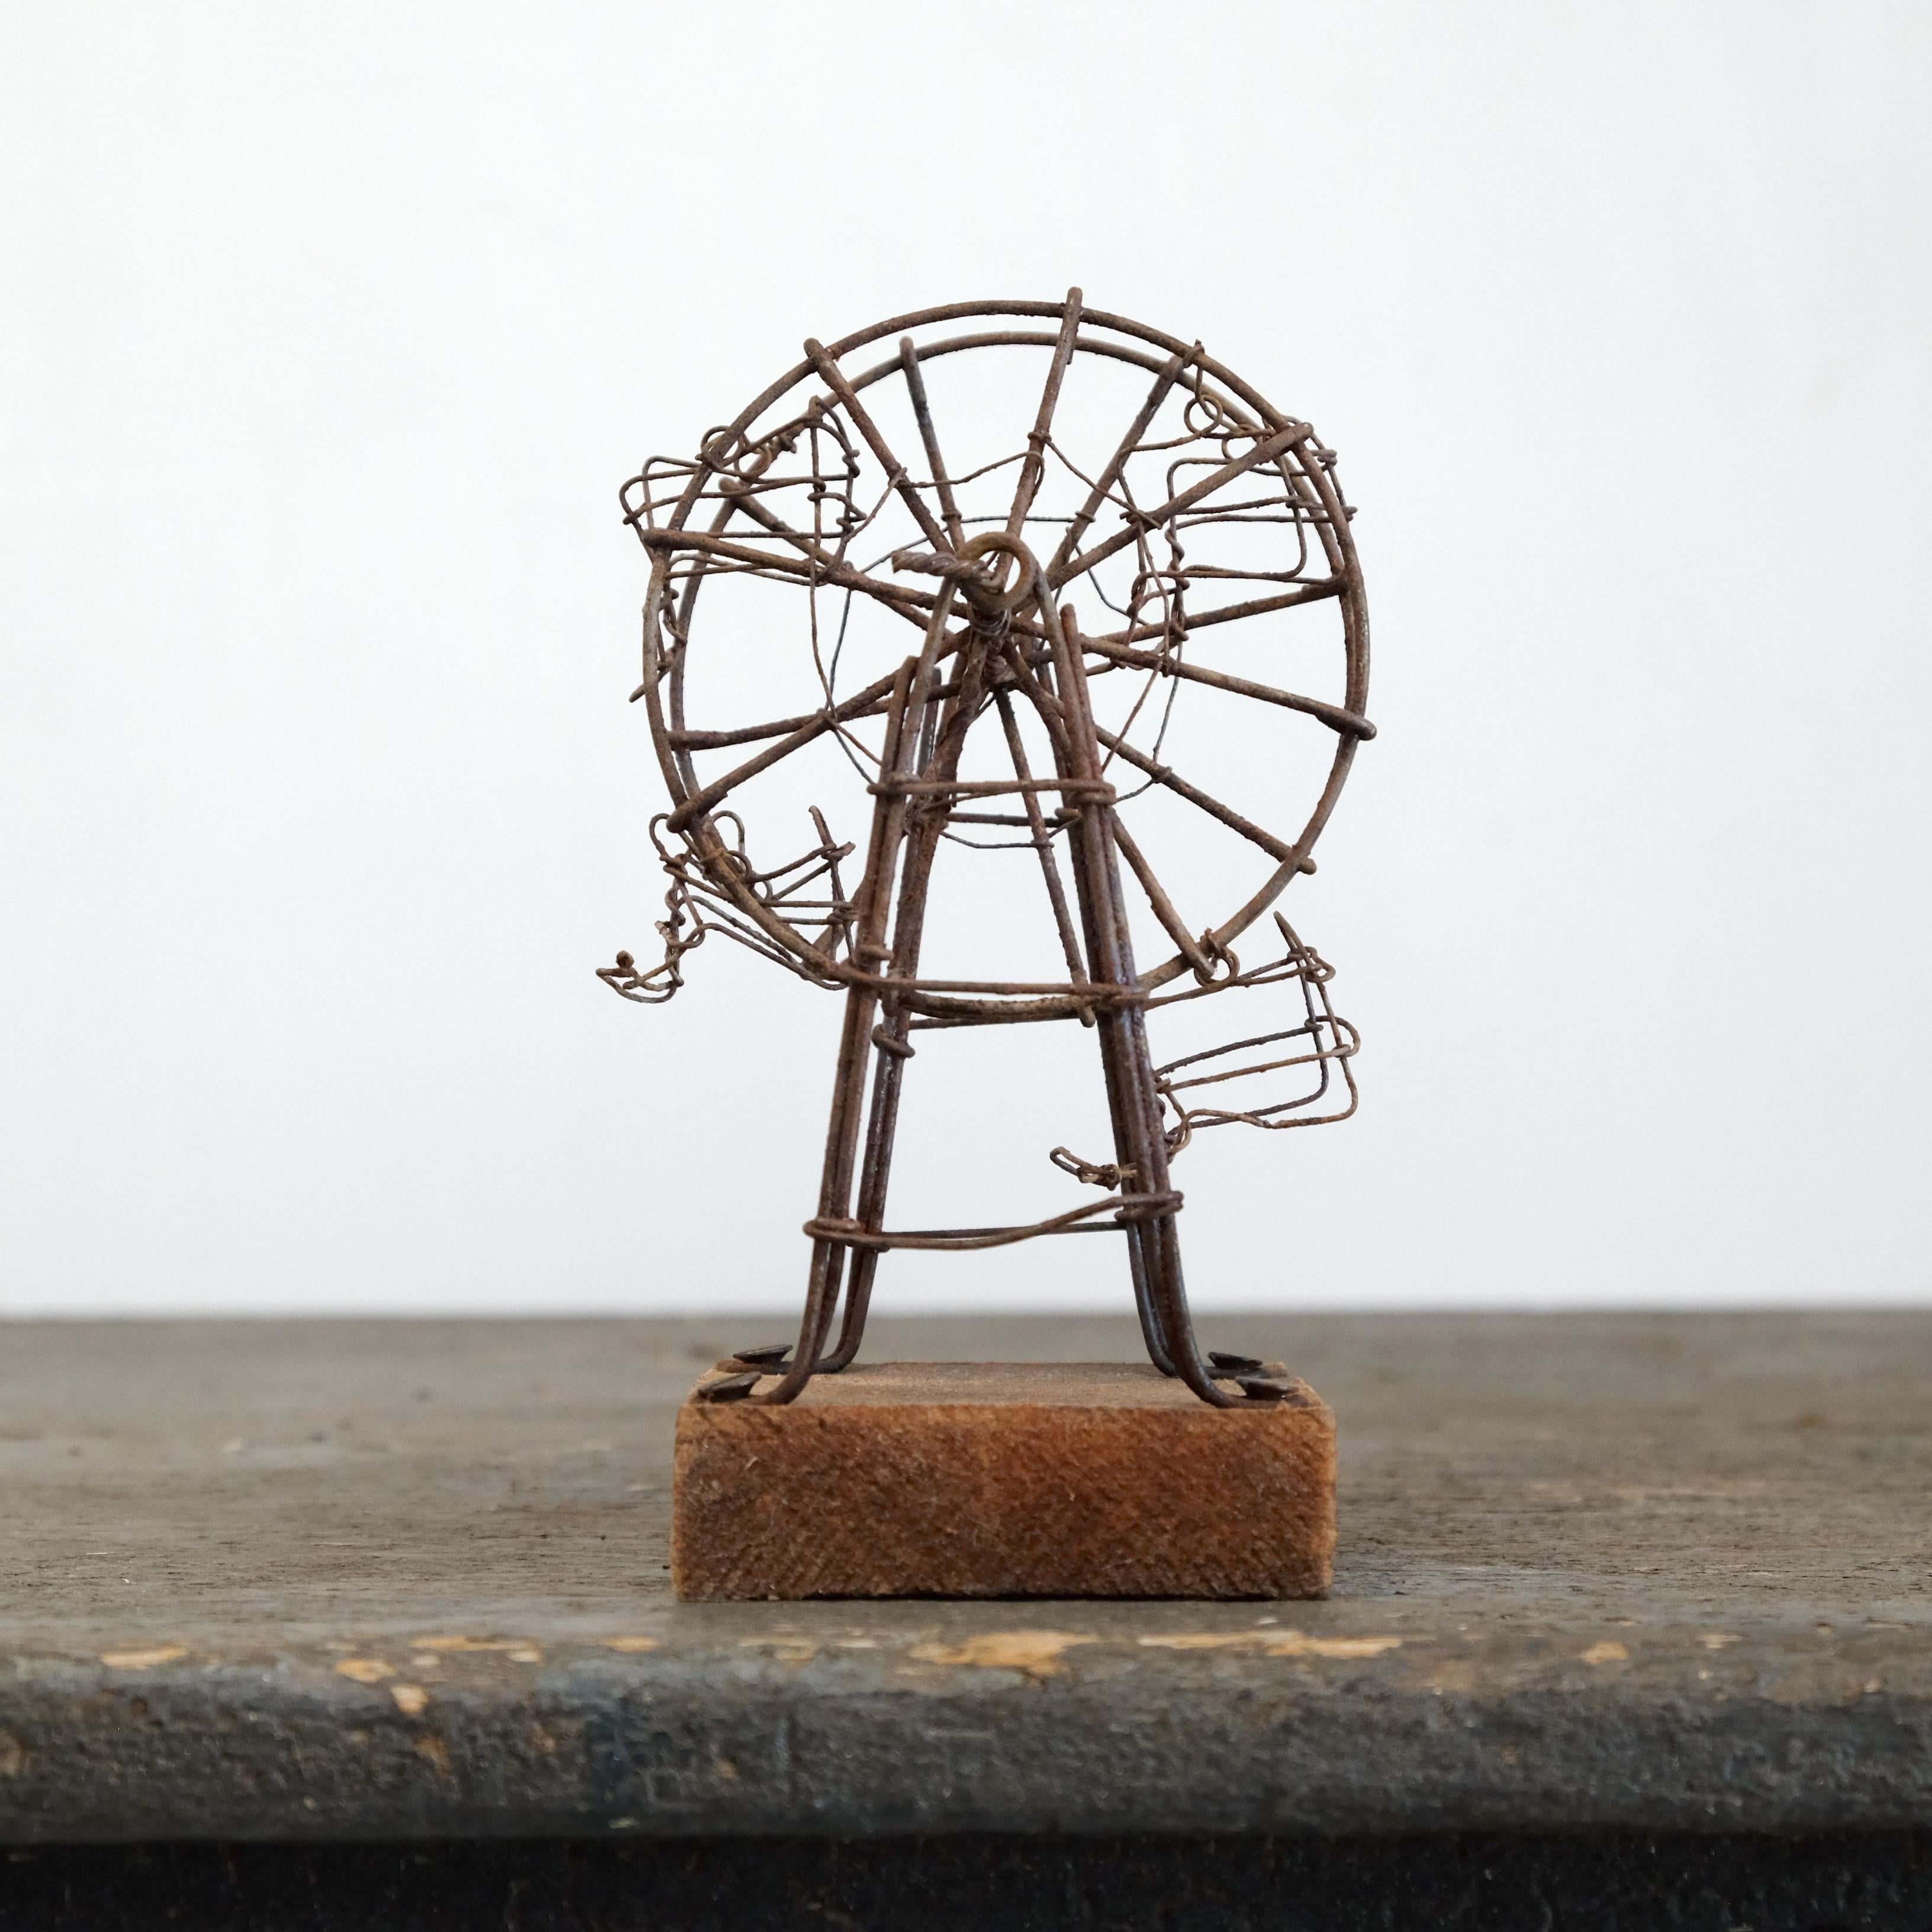 Hand-Crafted Folk Art Wirework Ferris Wheel, Early 20th Century, Naive Primitive, Fairground For Sale